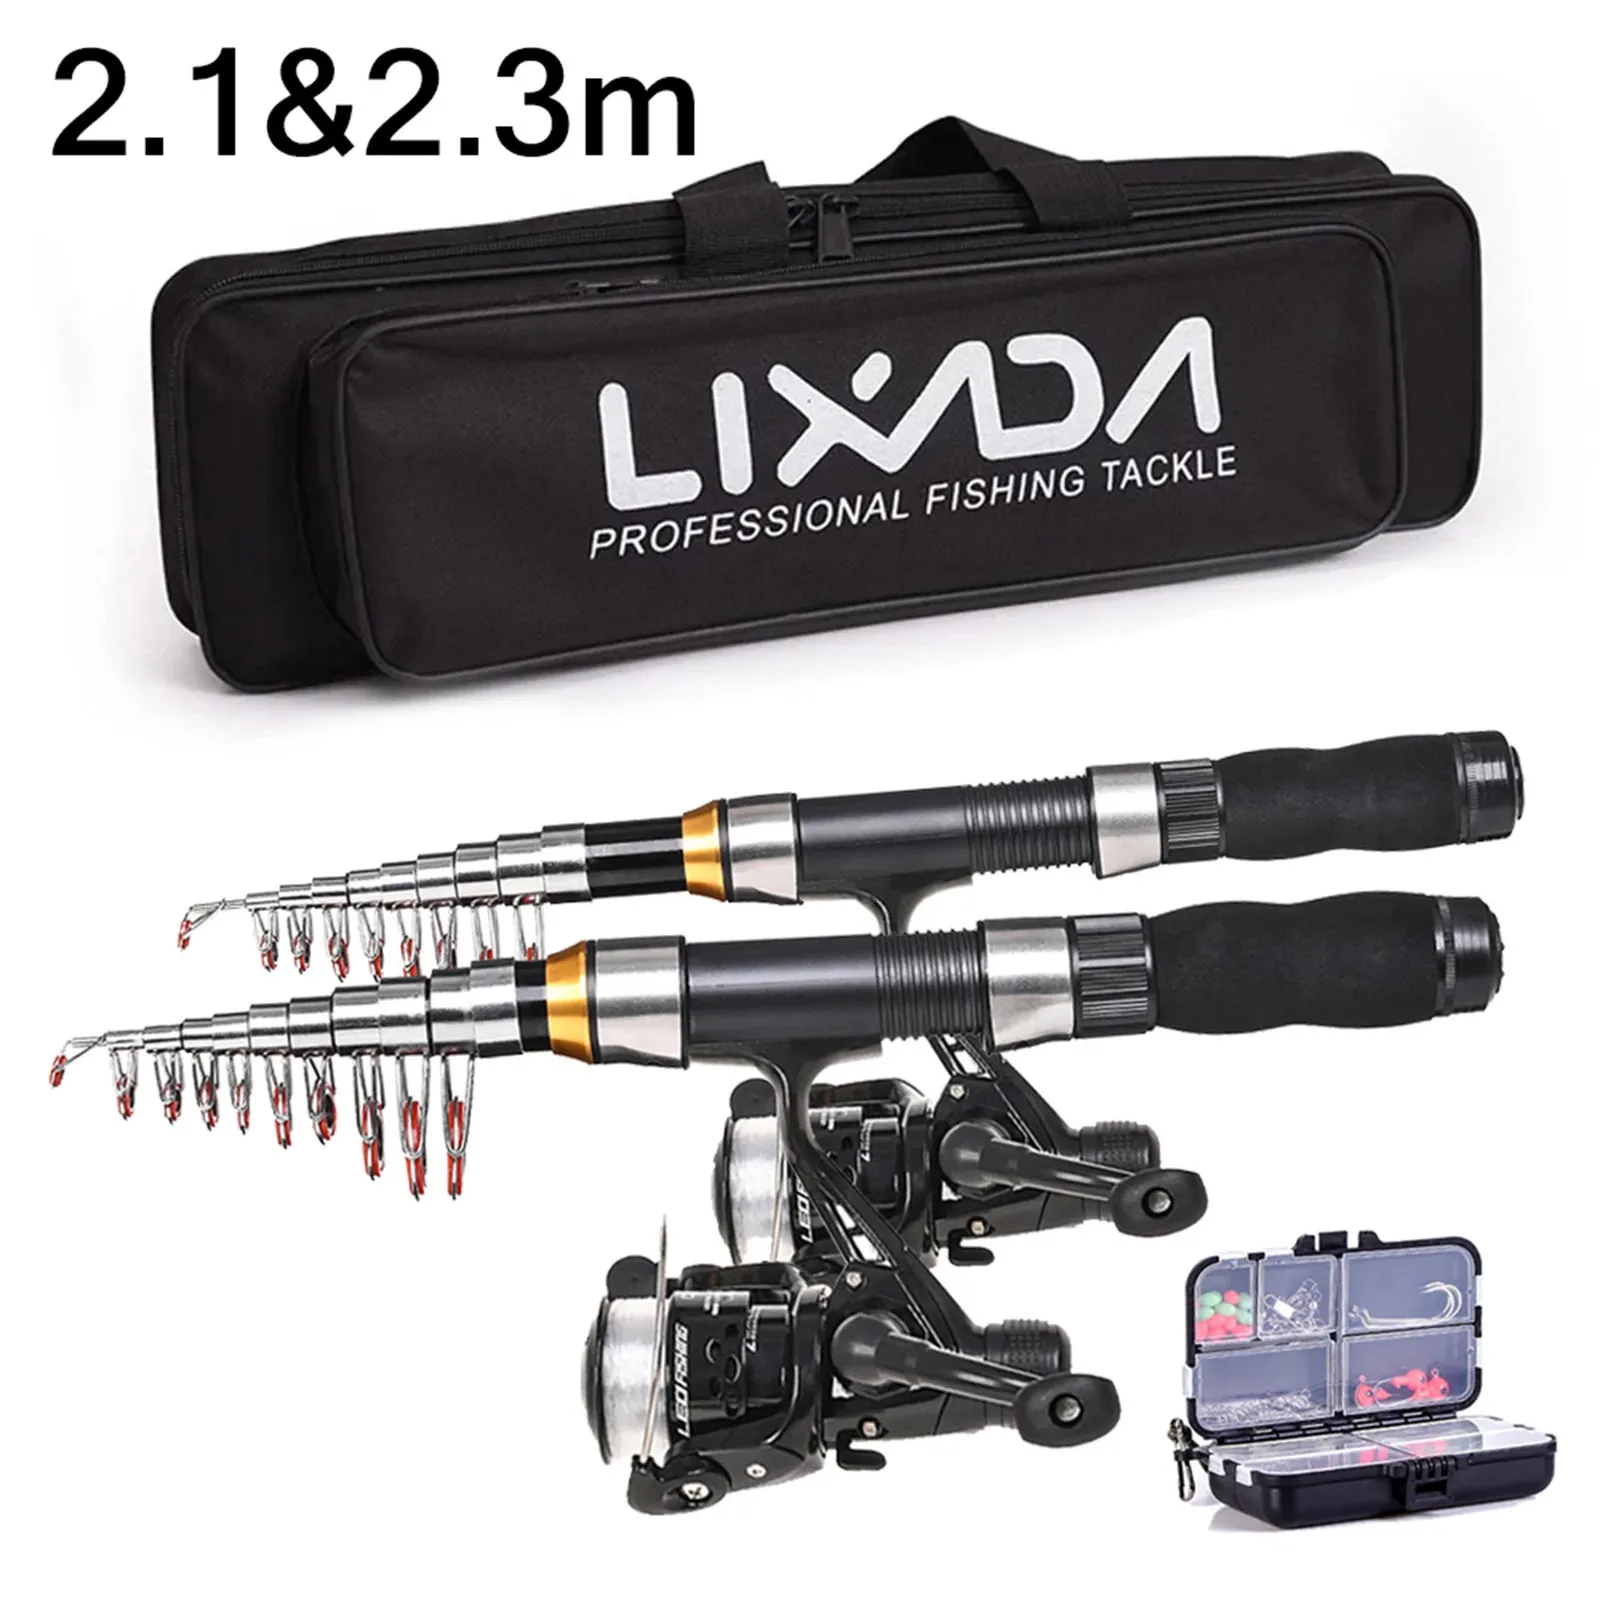 Lixada Telescopic Rod Reel Combo Full Kit With Carbon Fiber Pole, Spinning  Bag, And Pesca Gear Set Fishing Tool Set 21m/23m From Xuan09, $20.2